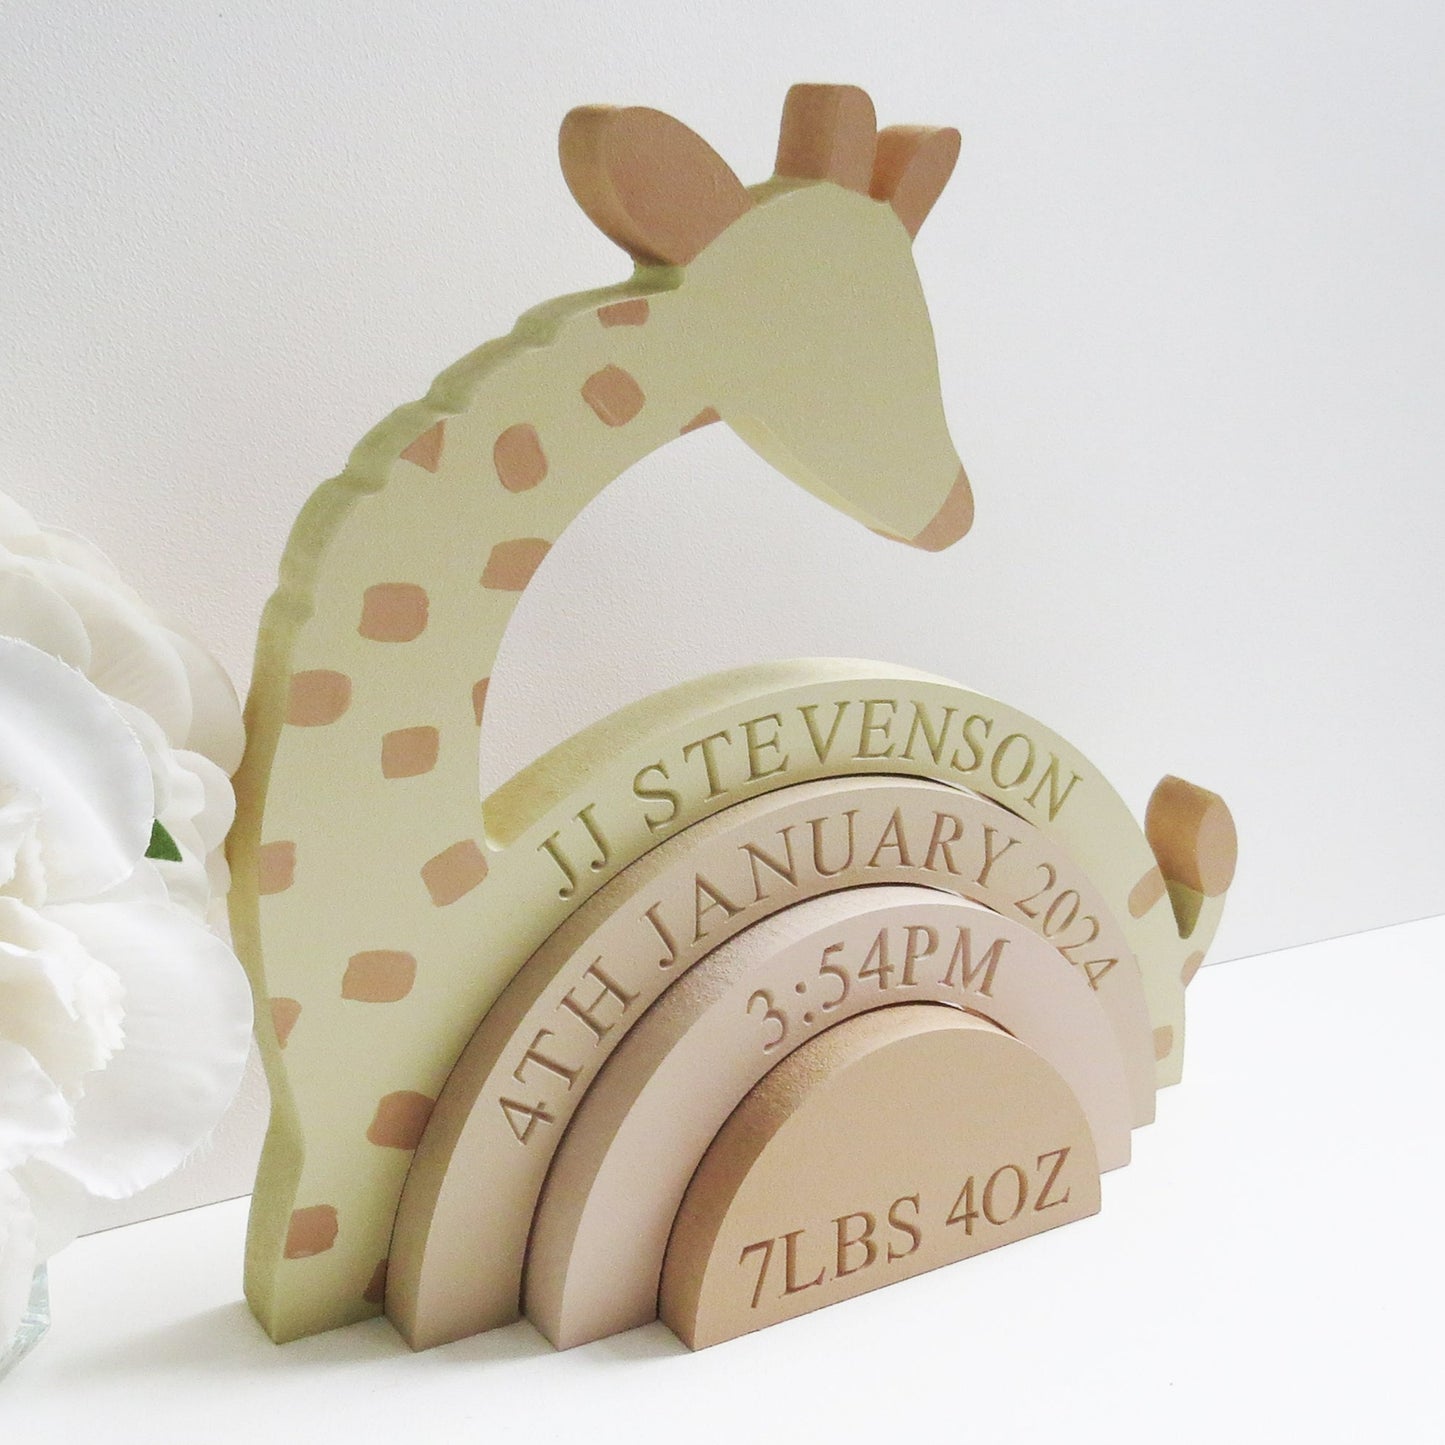 Giraffe themed rainbow stacker. Perfect for a kids nursery or bedroom.